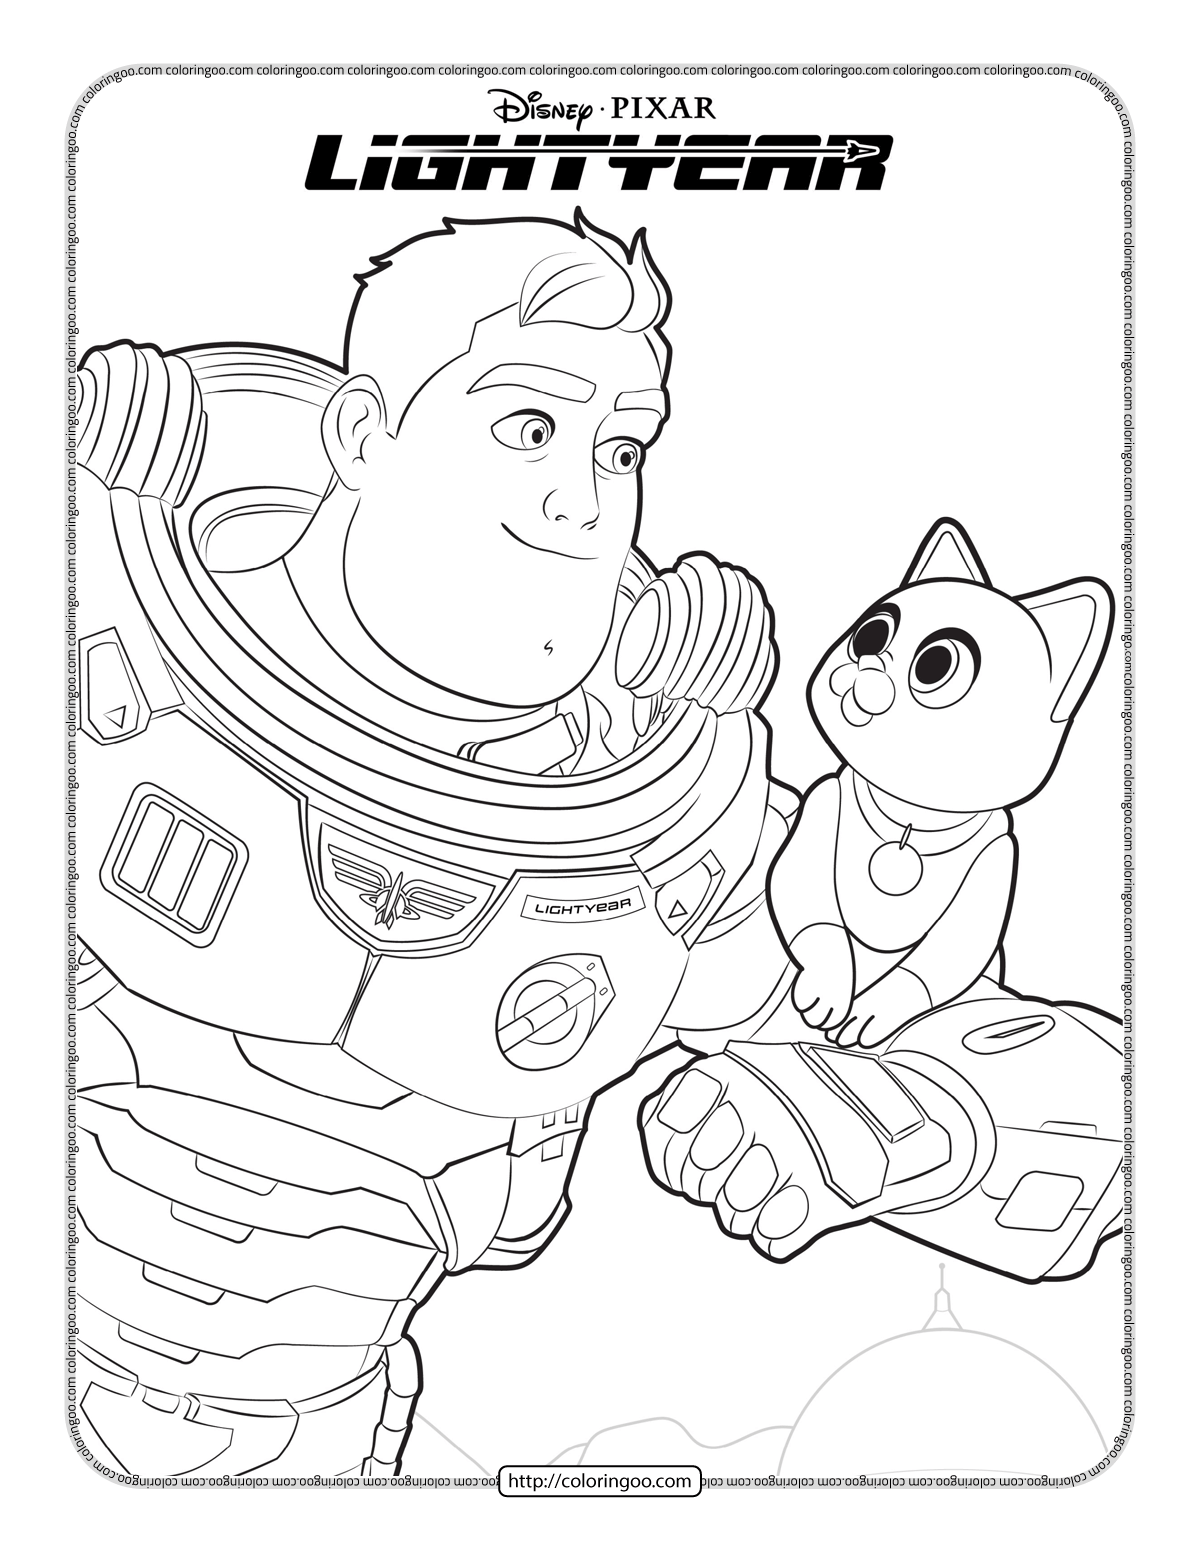 buzz lightyear and sox coloring pages